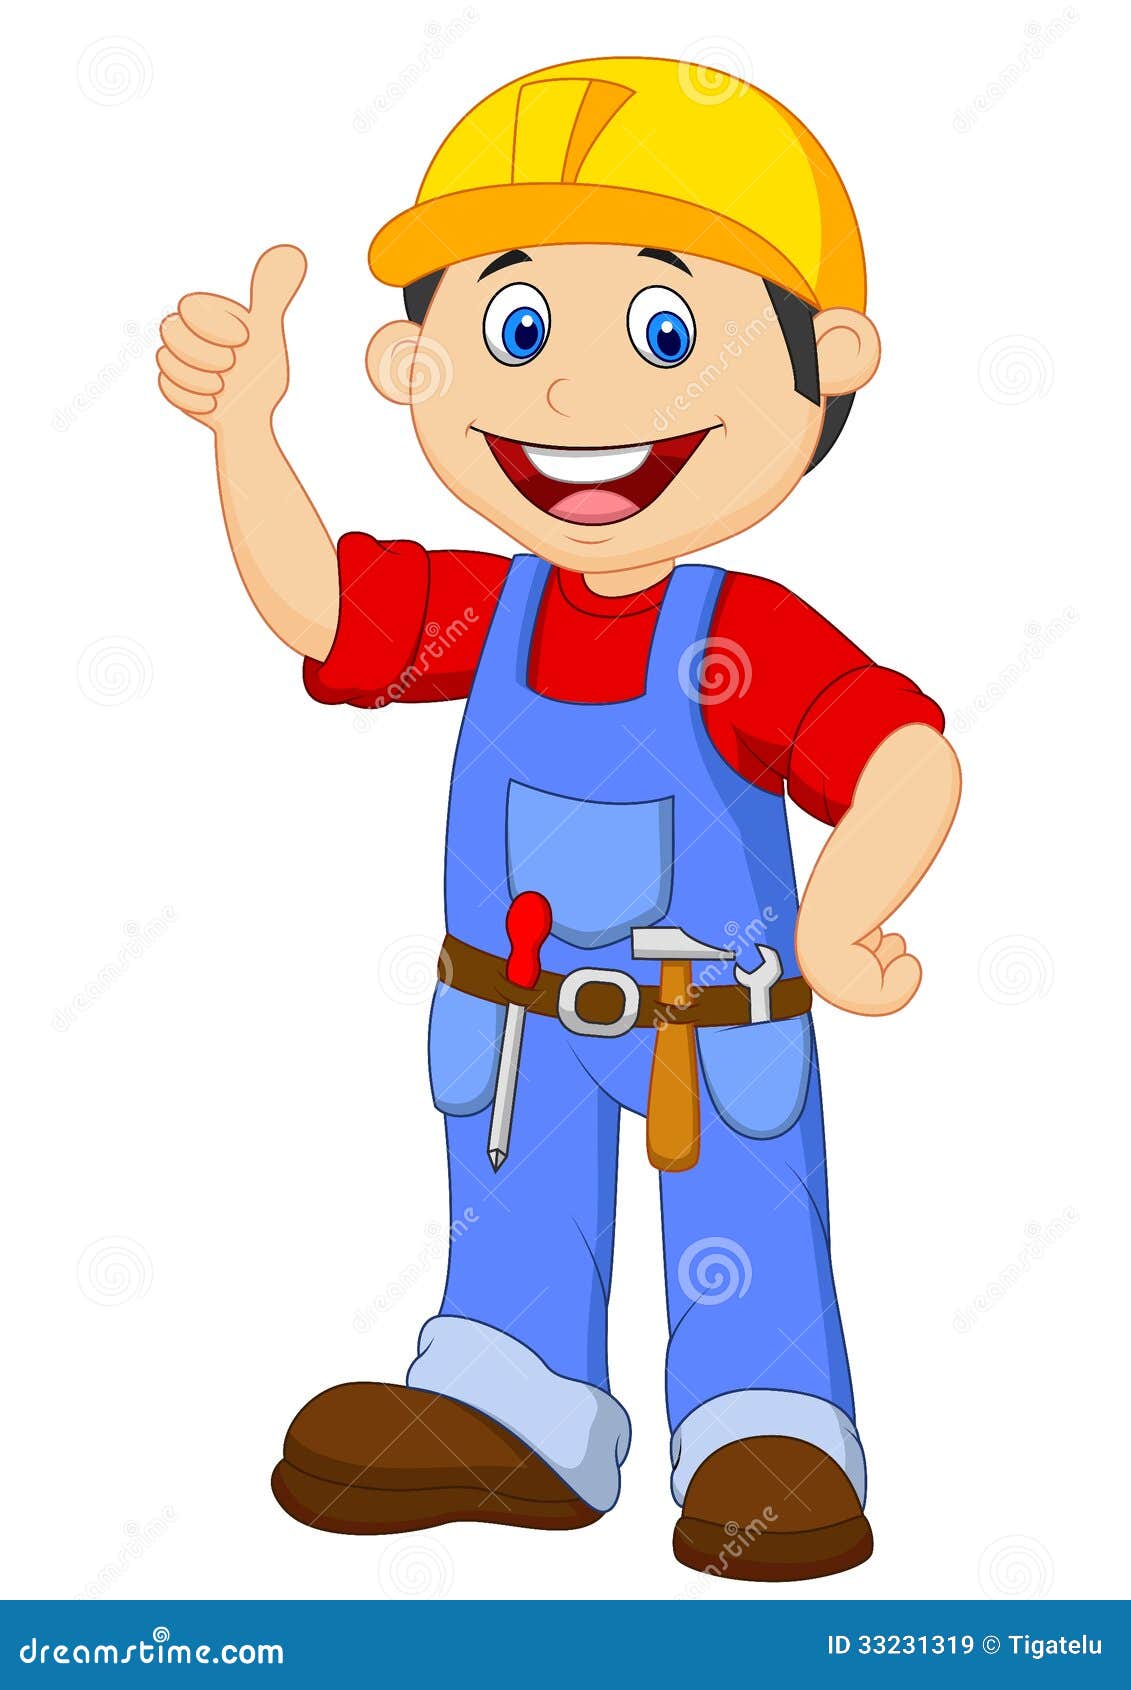 clipart handyman with tools - photo #19